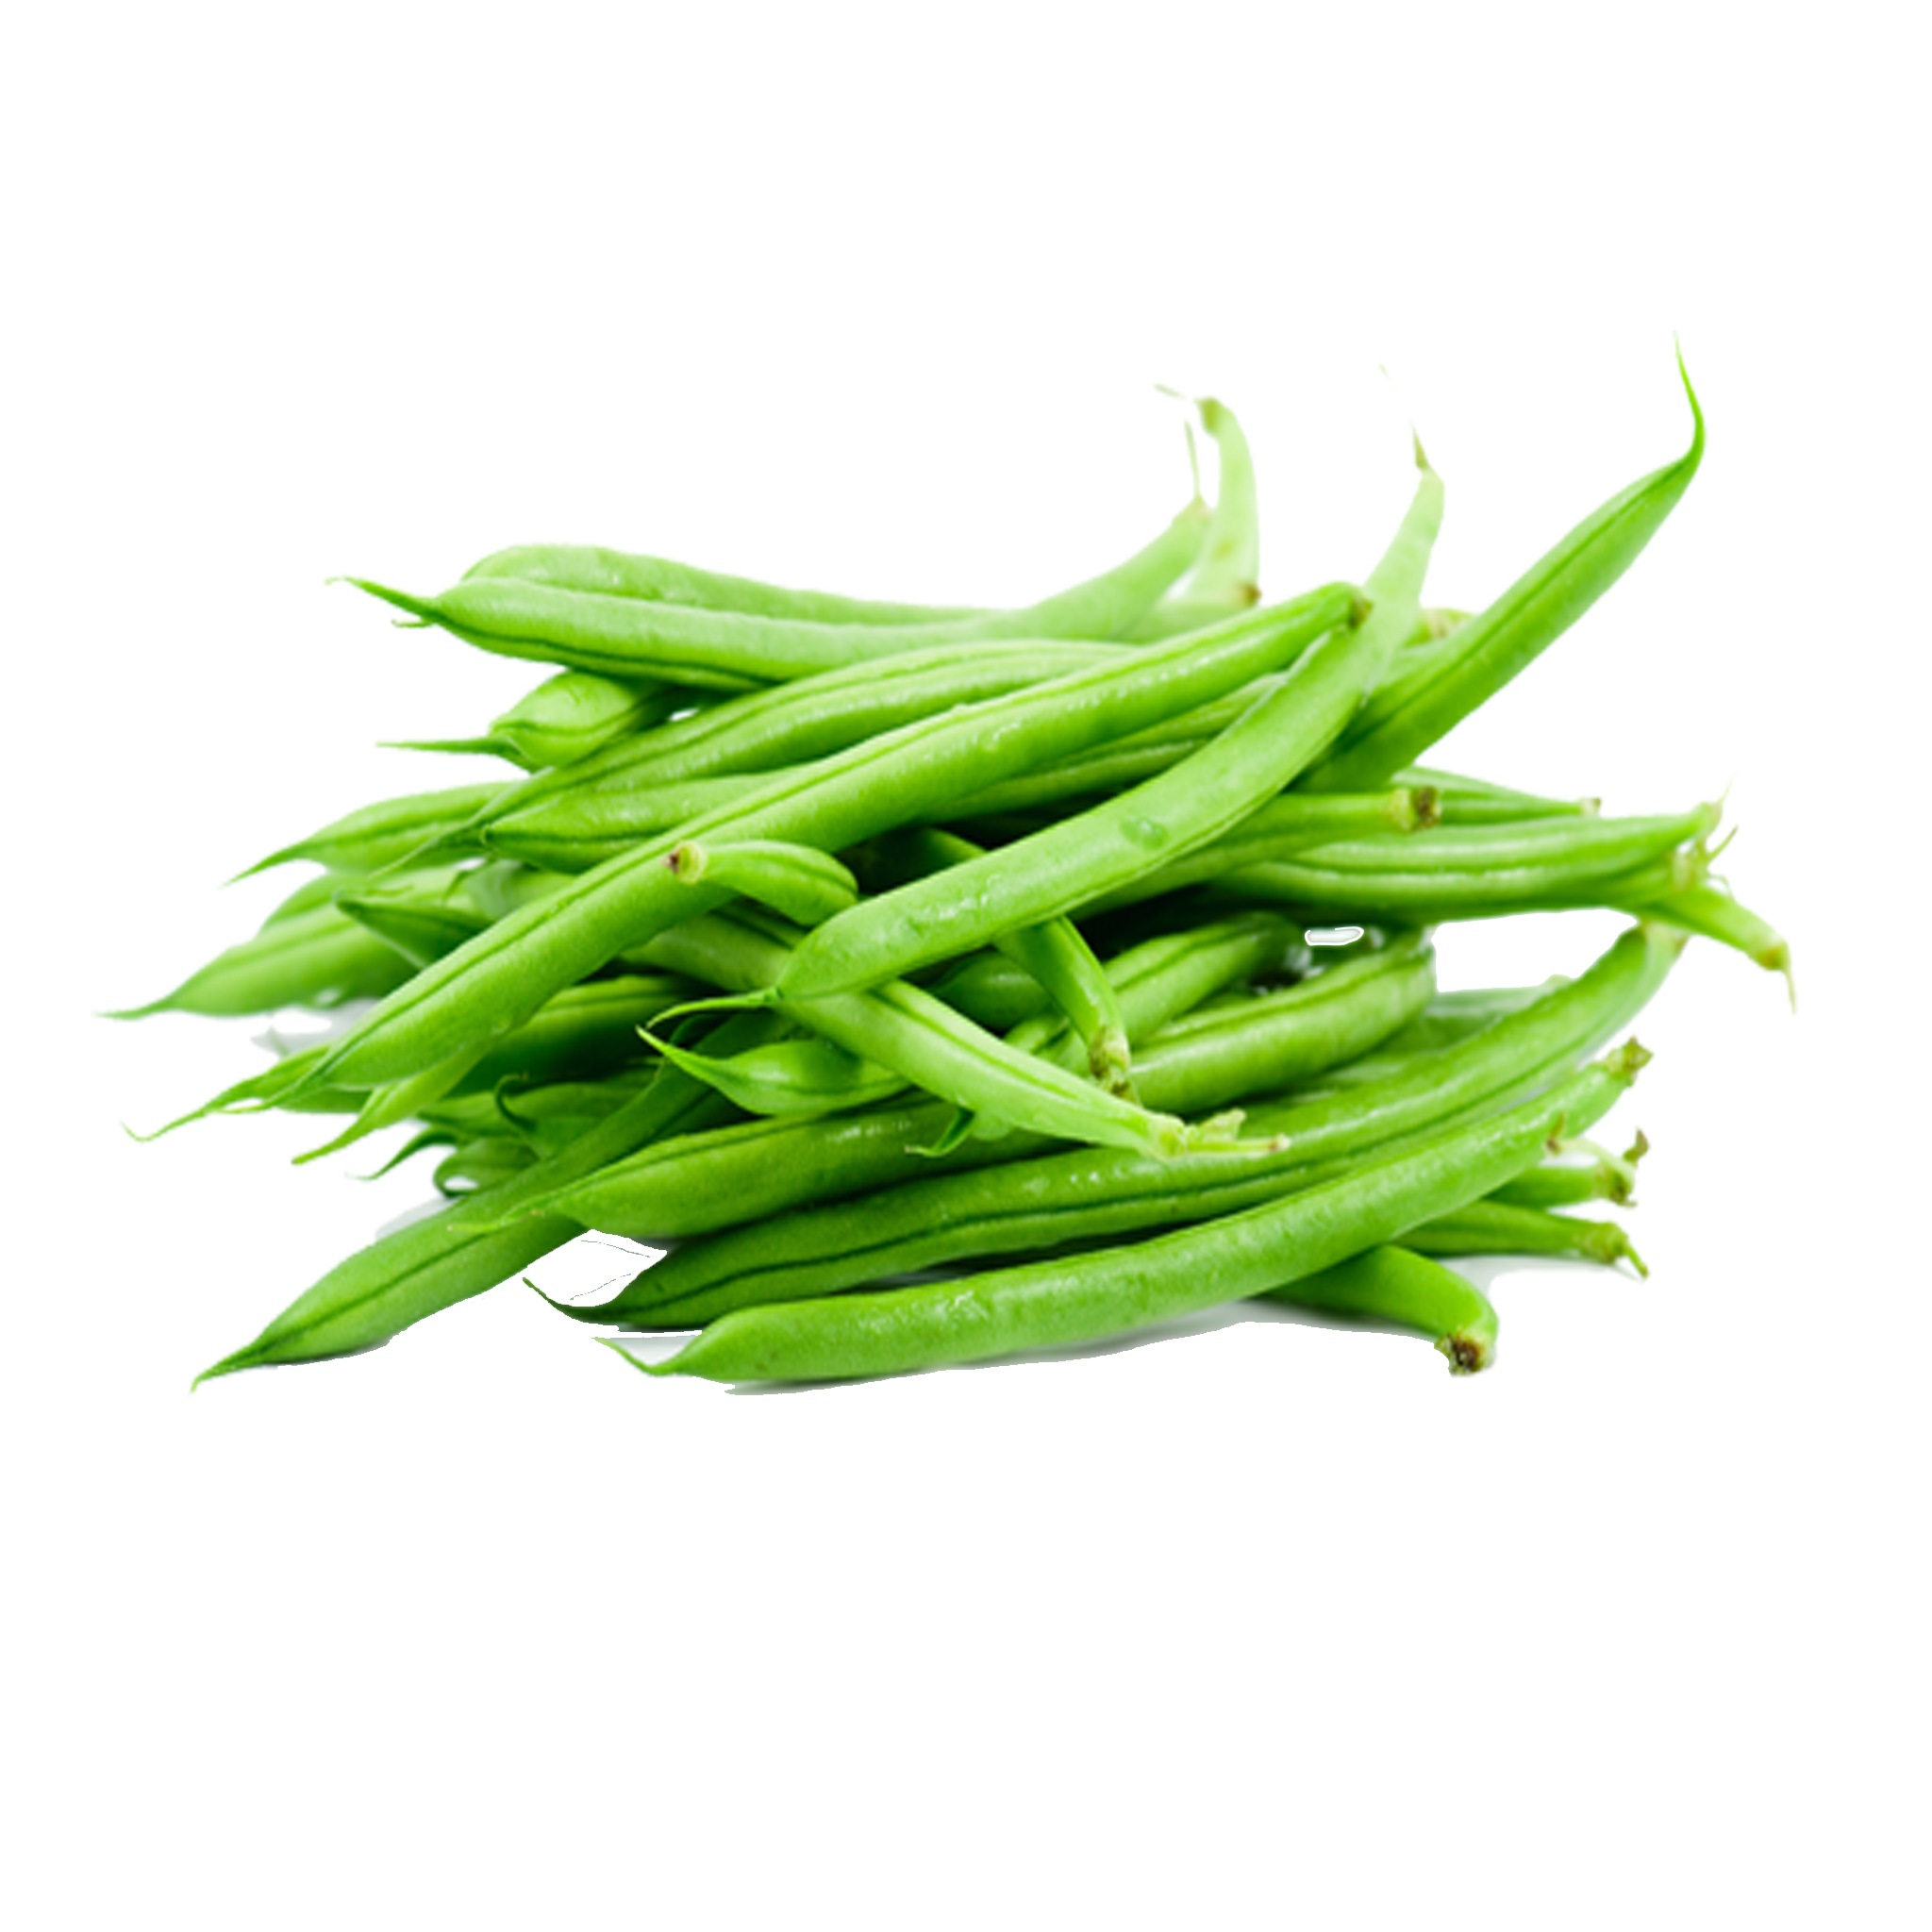 French Beans Transparent Image